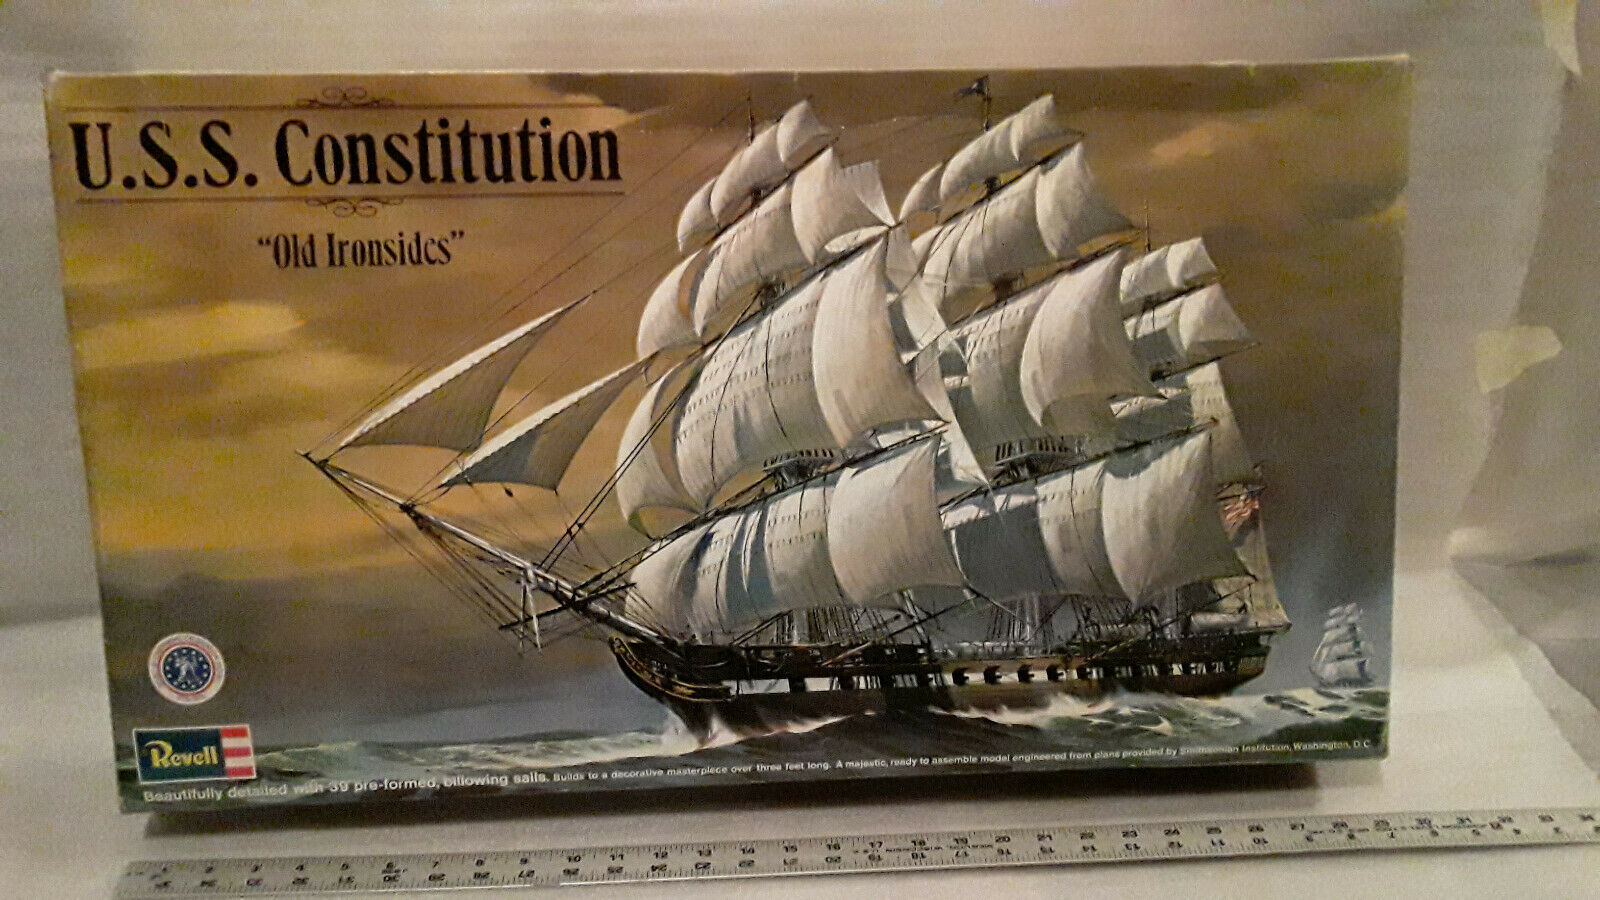 New Vintage 1974 Revell U.s.s. Consitution "old Ironsides" Model Ship